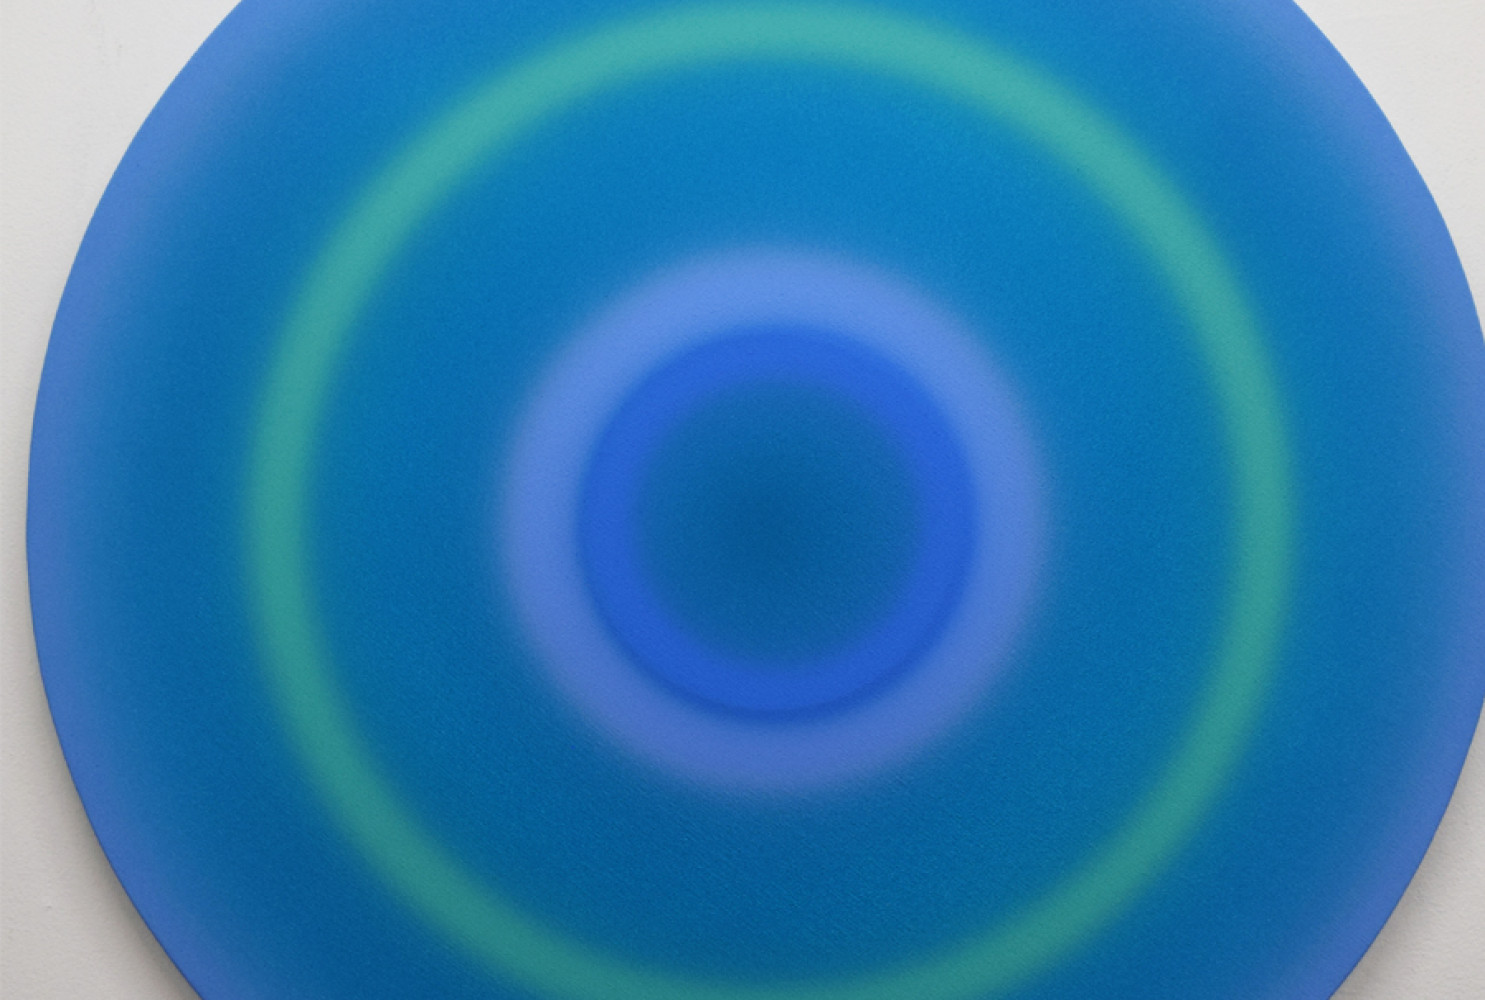 Spin Painting (Blue, Green): vinyl acrylic on canvas, 32 inches, 2018